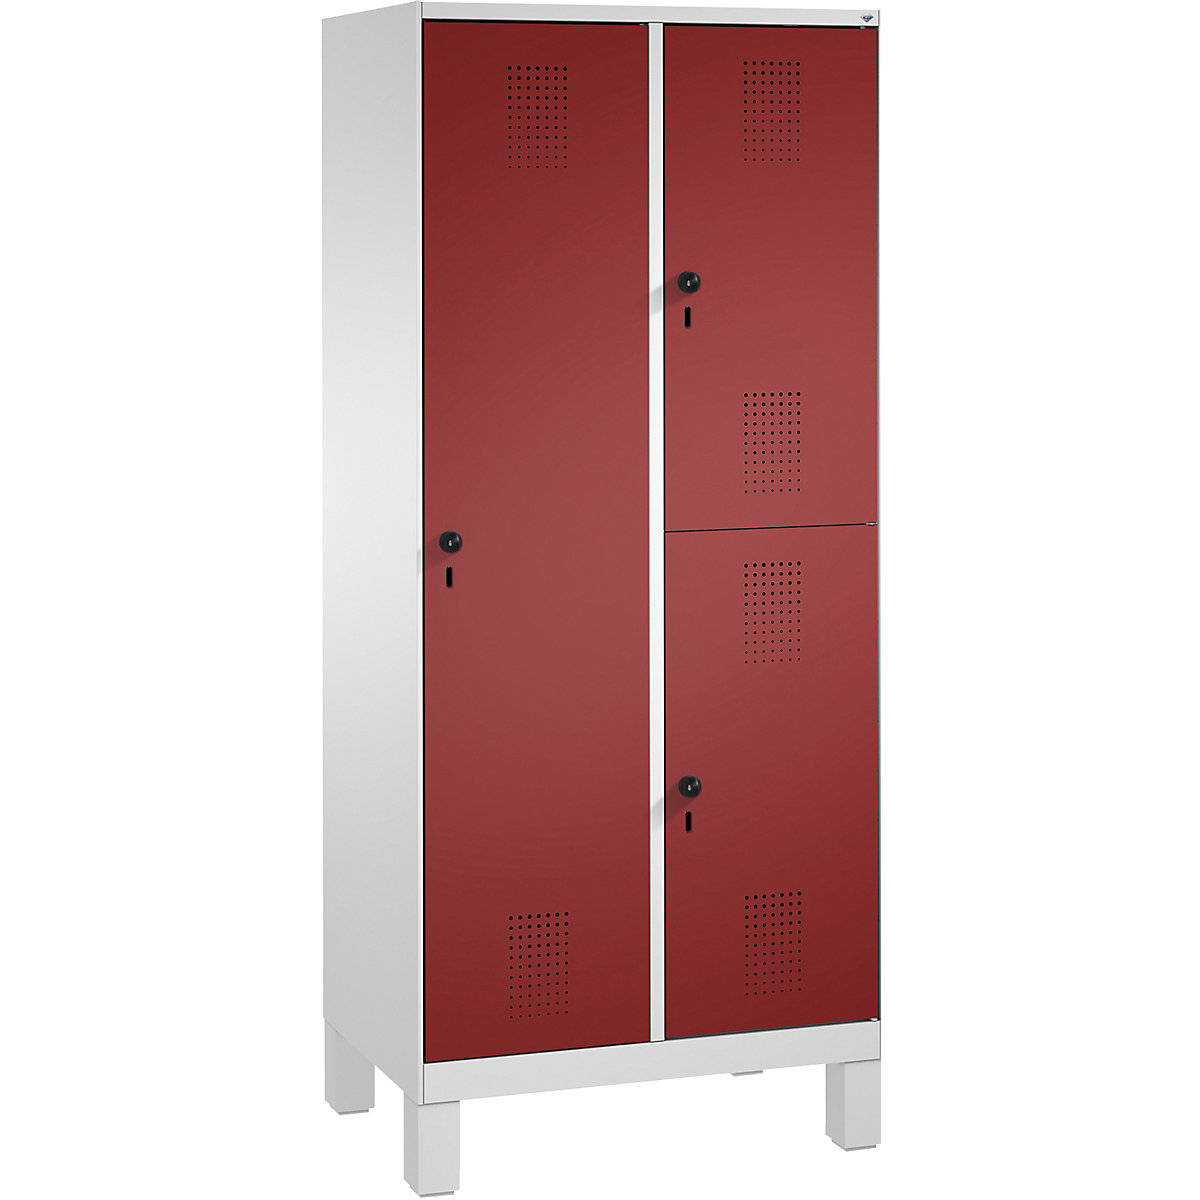 EVOLO combination cupboard, single and double tier – C+P, 2 compartments, 3 doors, compartment width 400 mm, with feet, light grey / ruby red